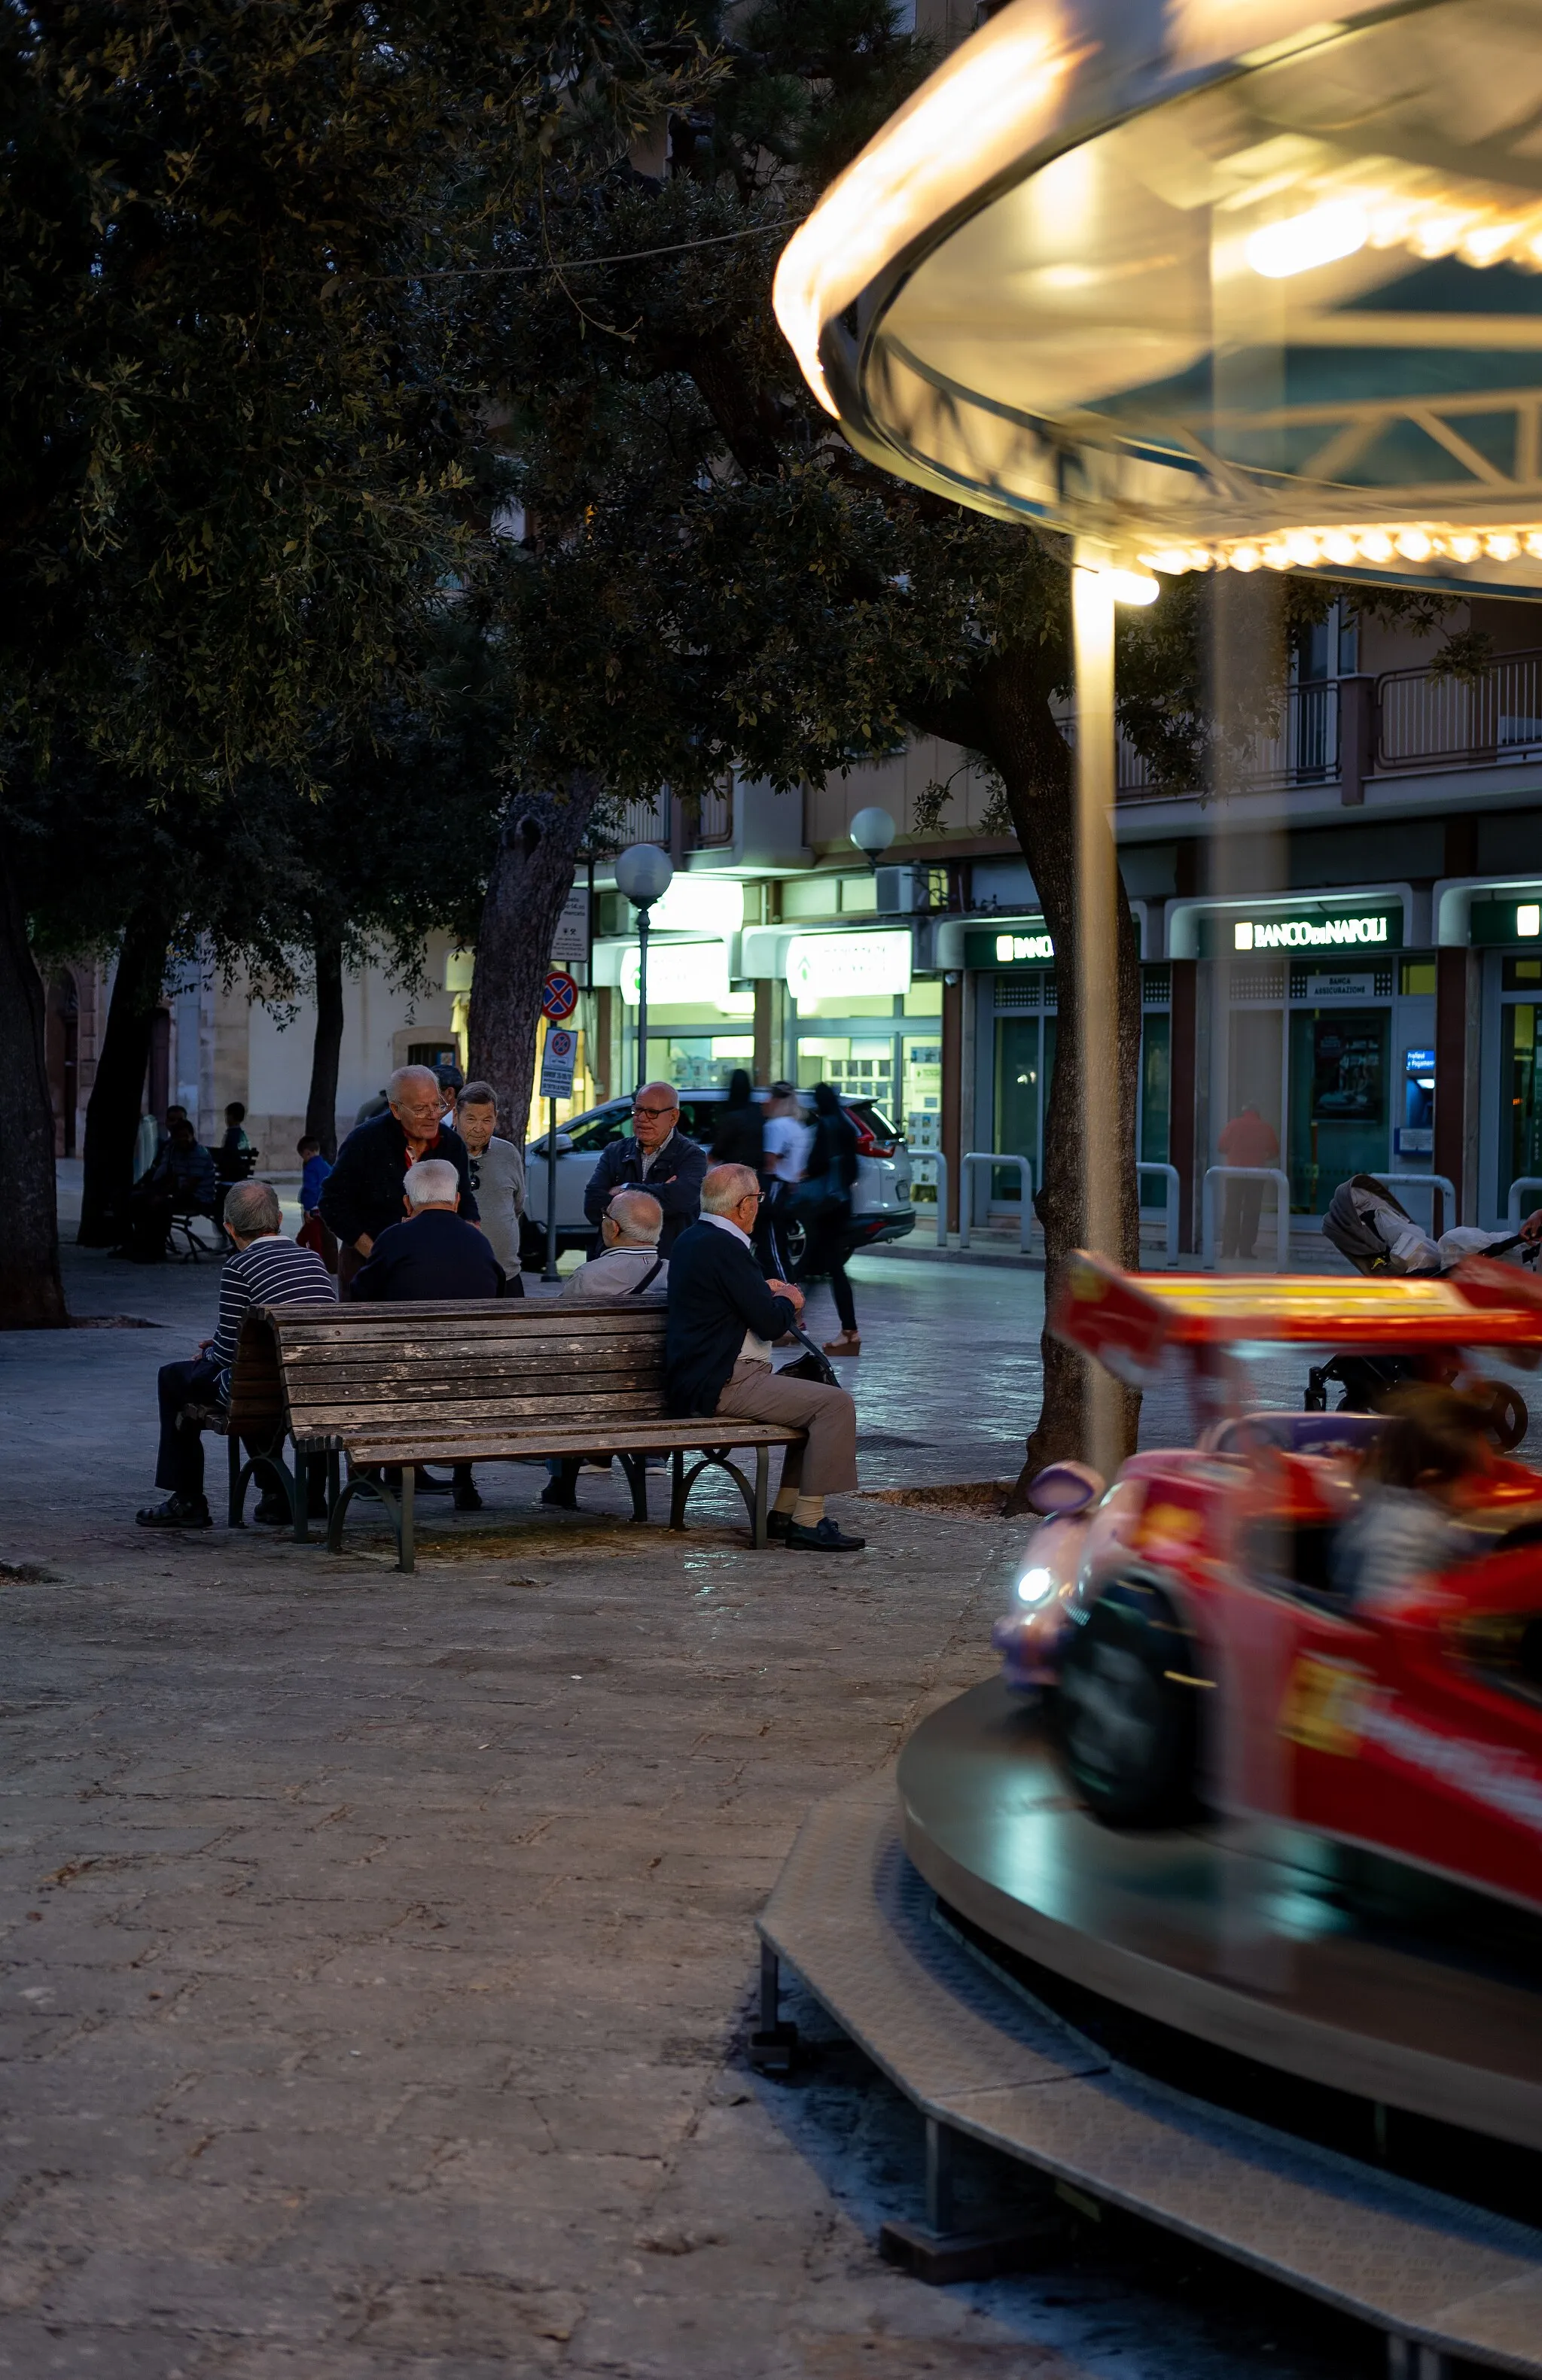 Photo showing: Old men sitting by a carousel, Castellana Grotte, Italy (PPL1-Corrected)